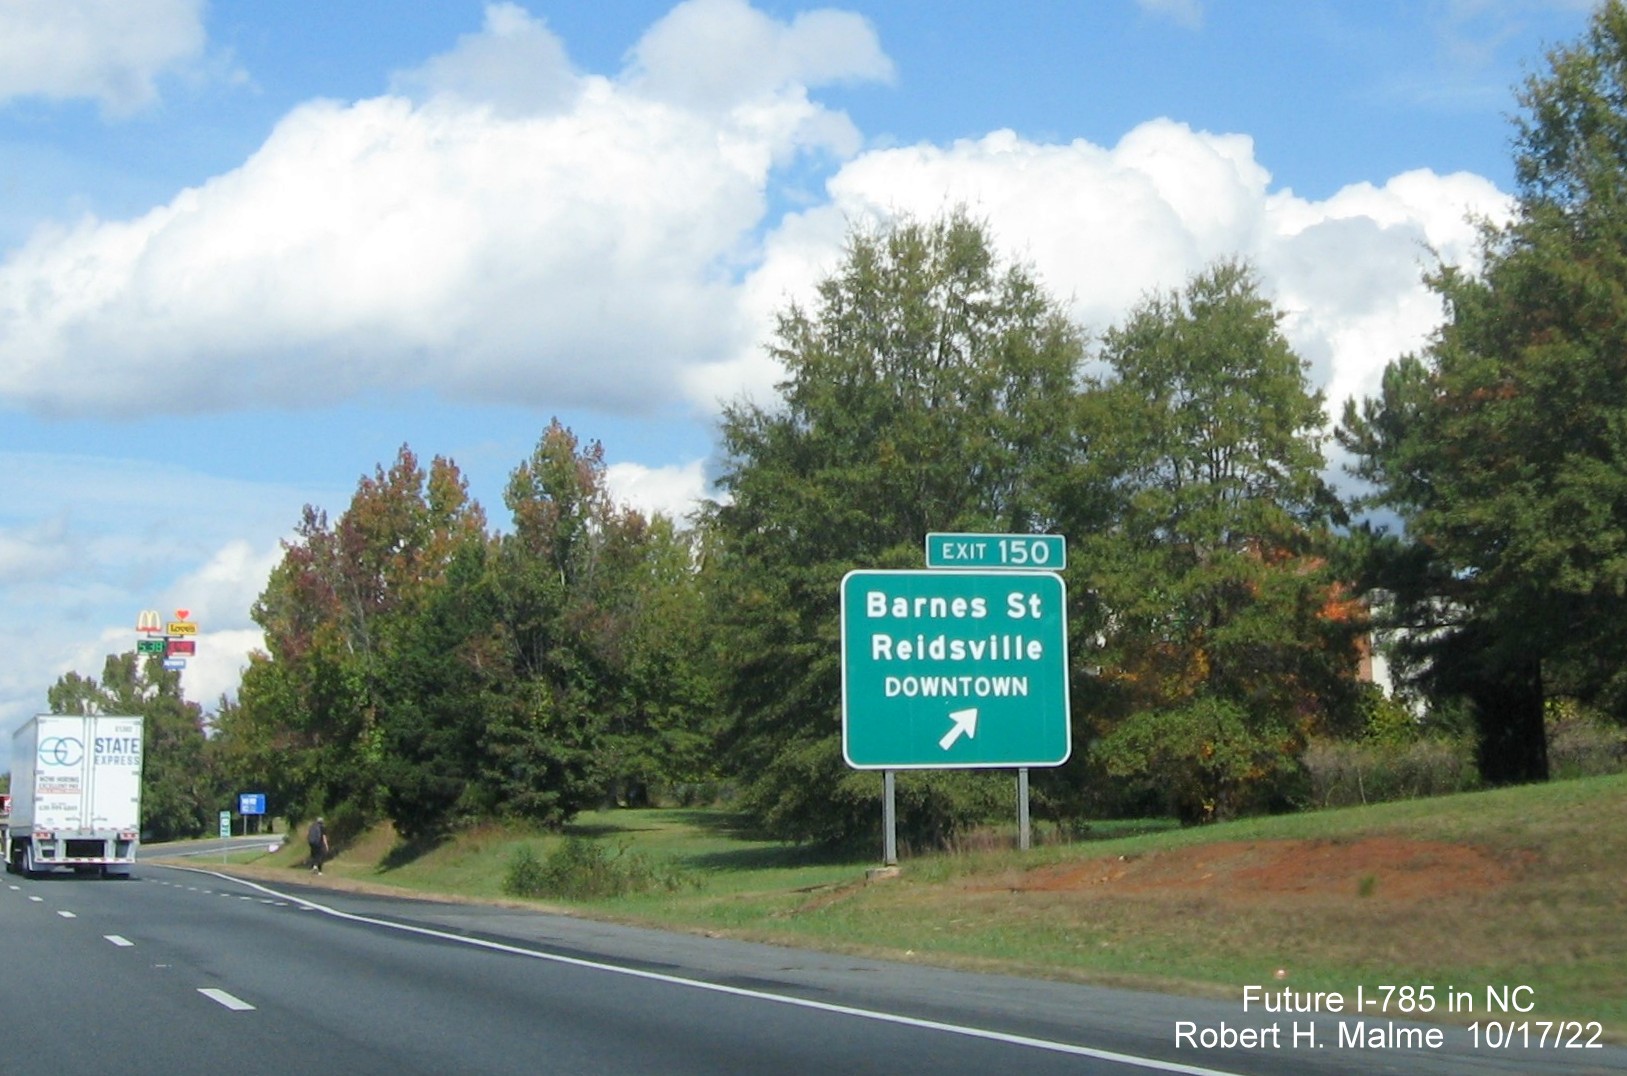 Image of a ground mounted ramp sign for the Barners Street exit on US 29 (Future I-785) North/US 158 East in Reidsville, October 2022